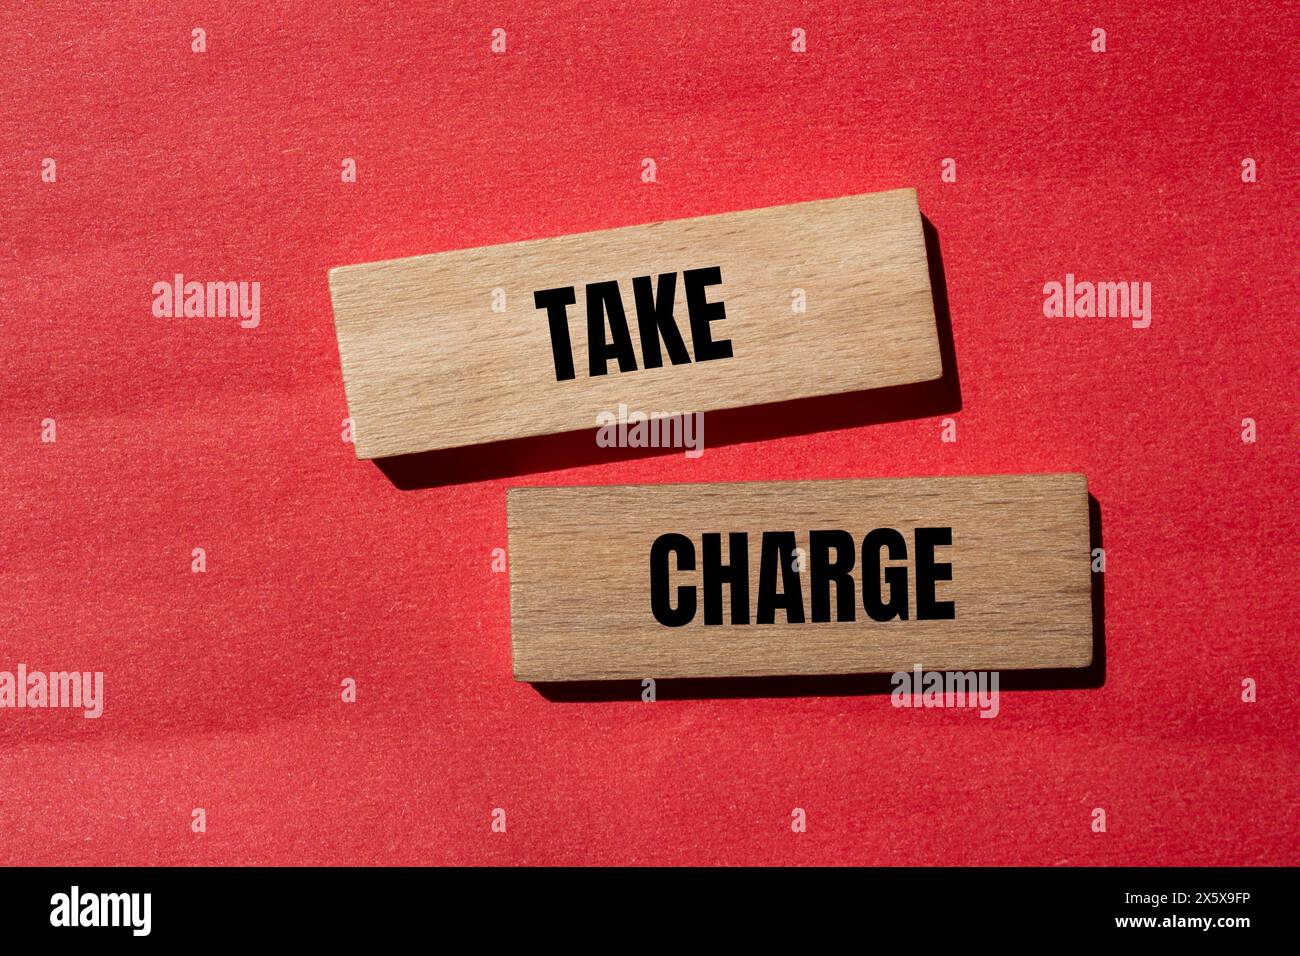 Take charge words written on wooden blocks with red background. Conceptual take charge symbol. Copy space. Stock Photo